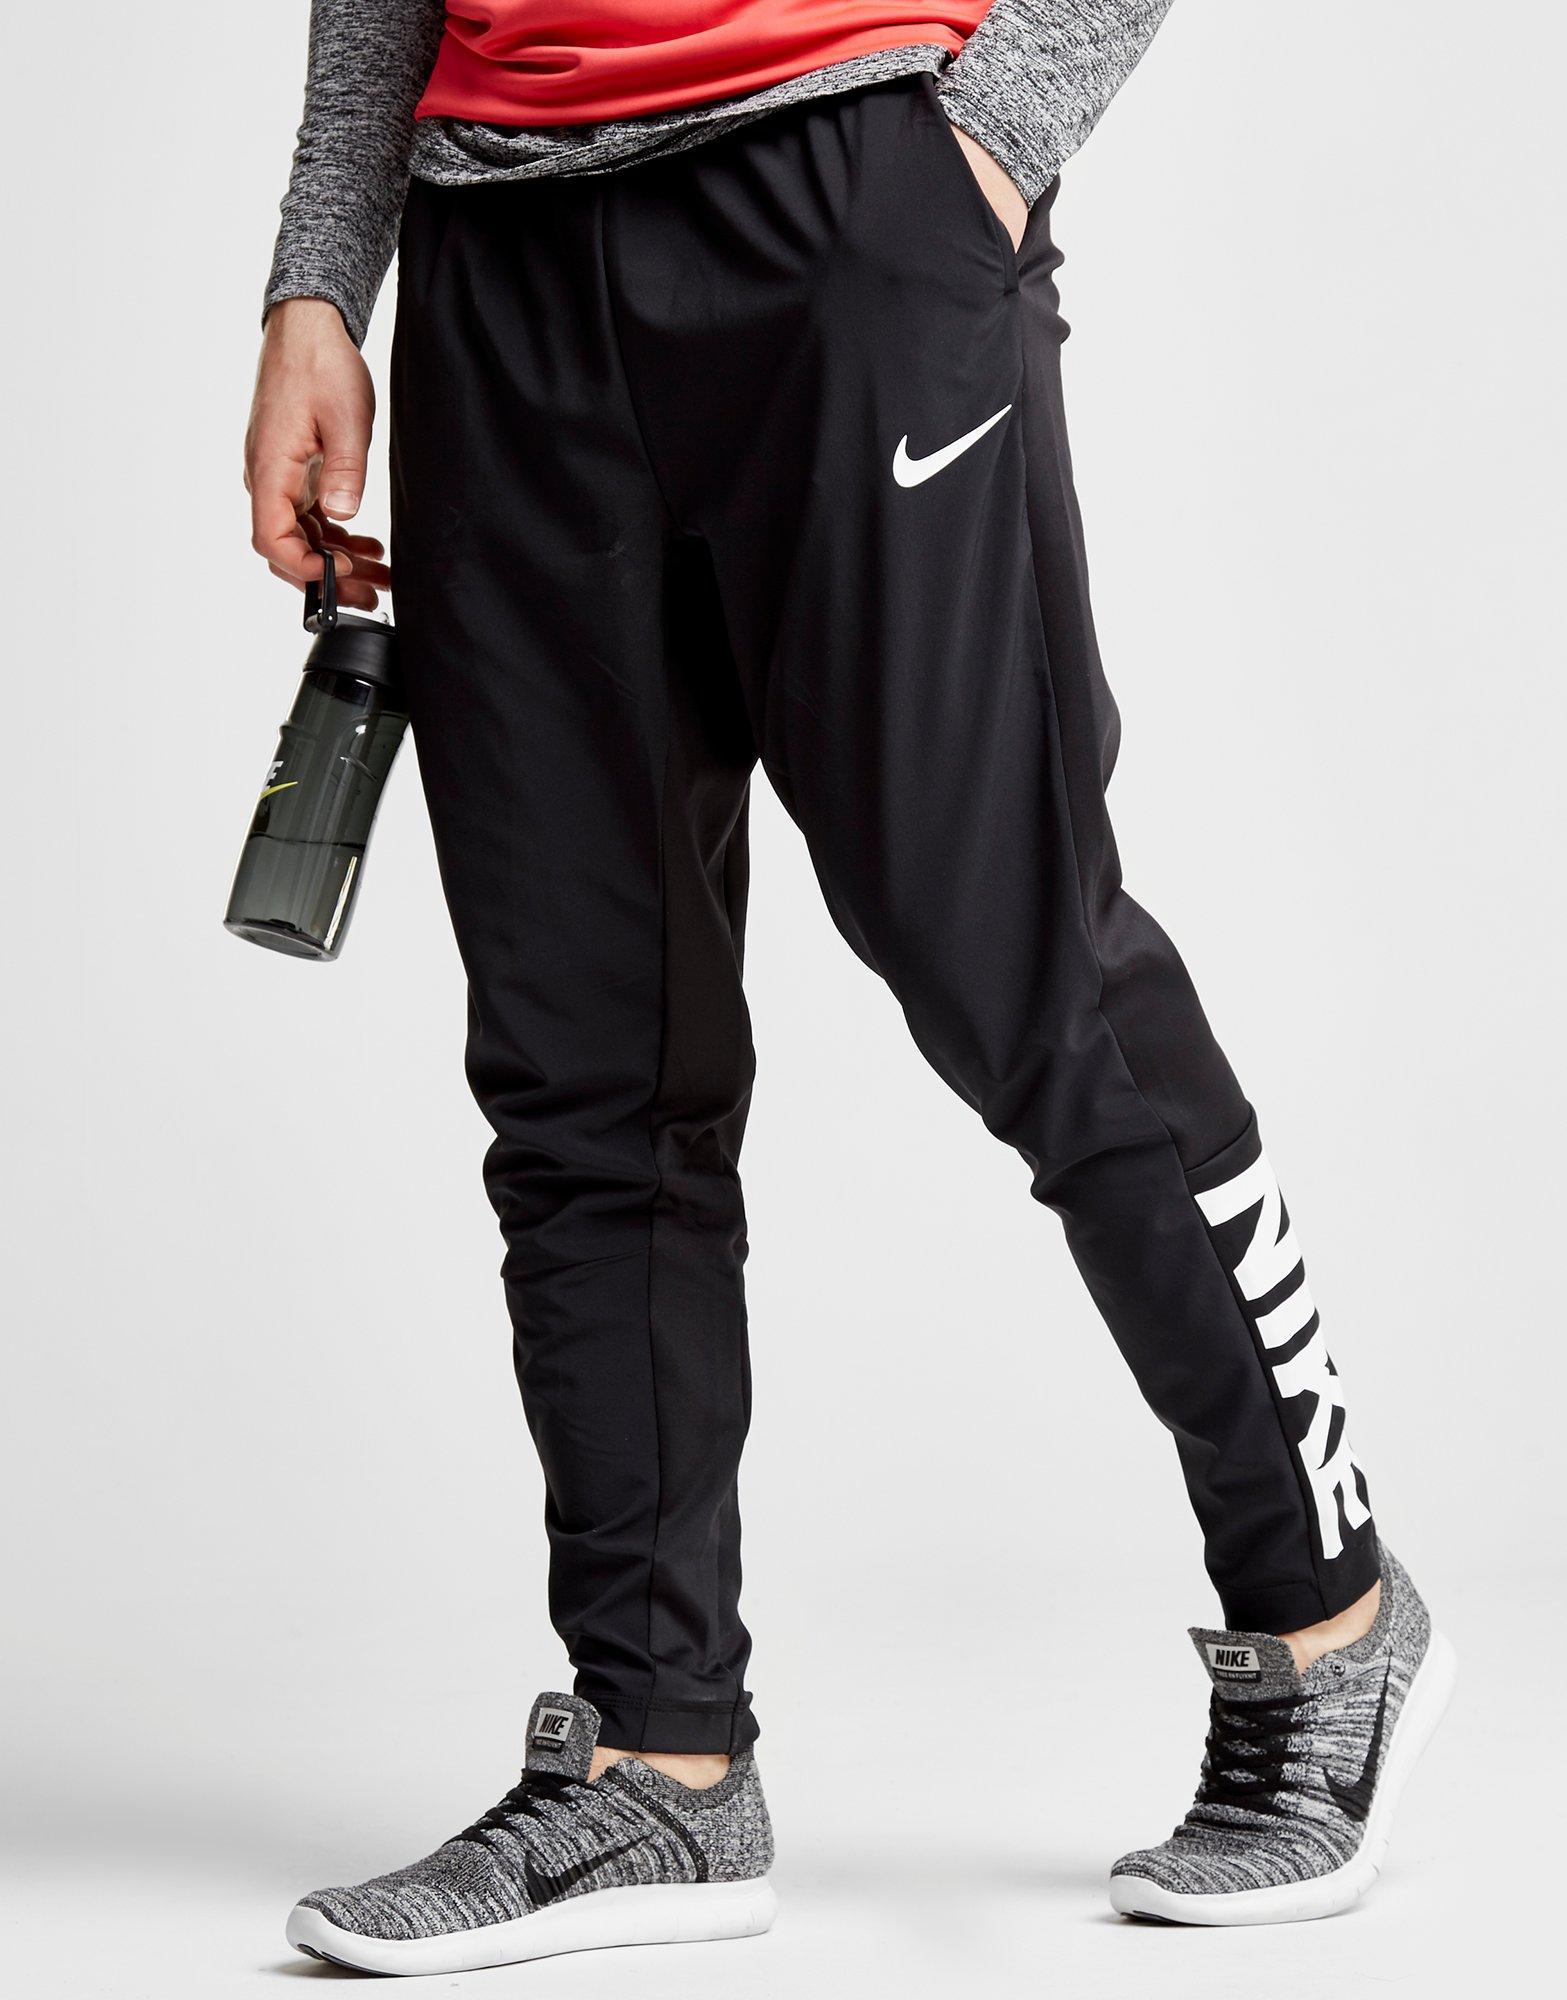 nike project x pants> OFF-75%